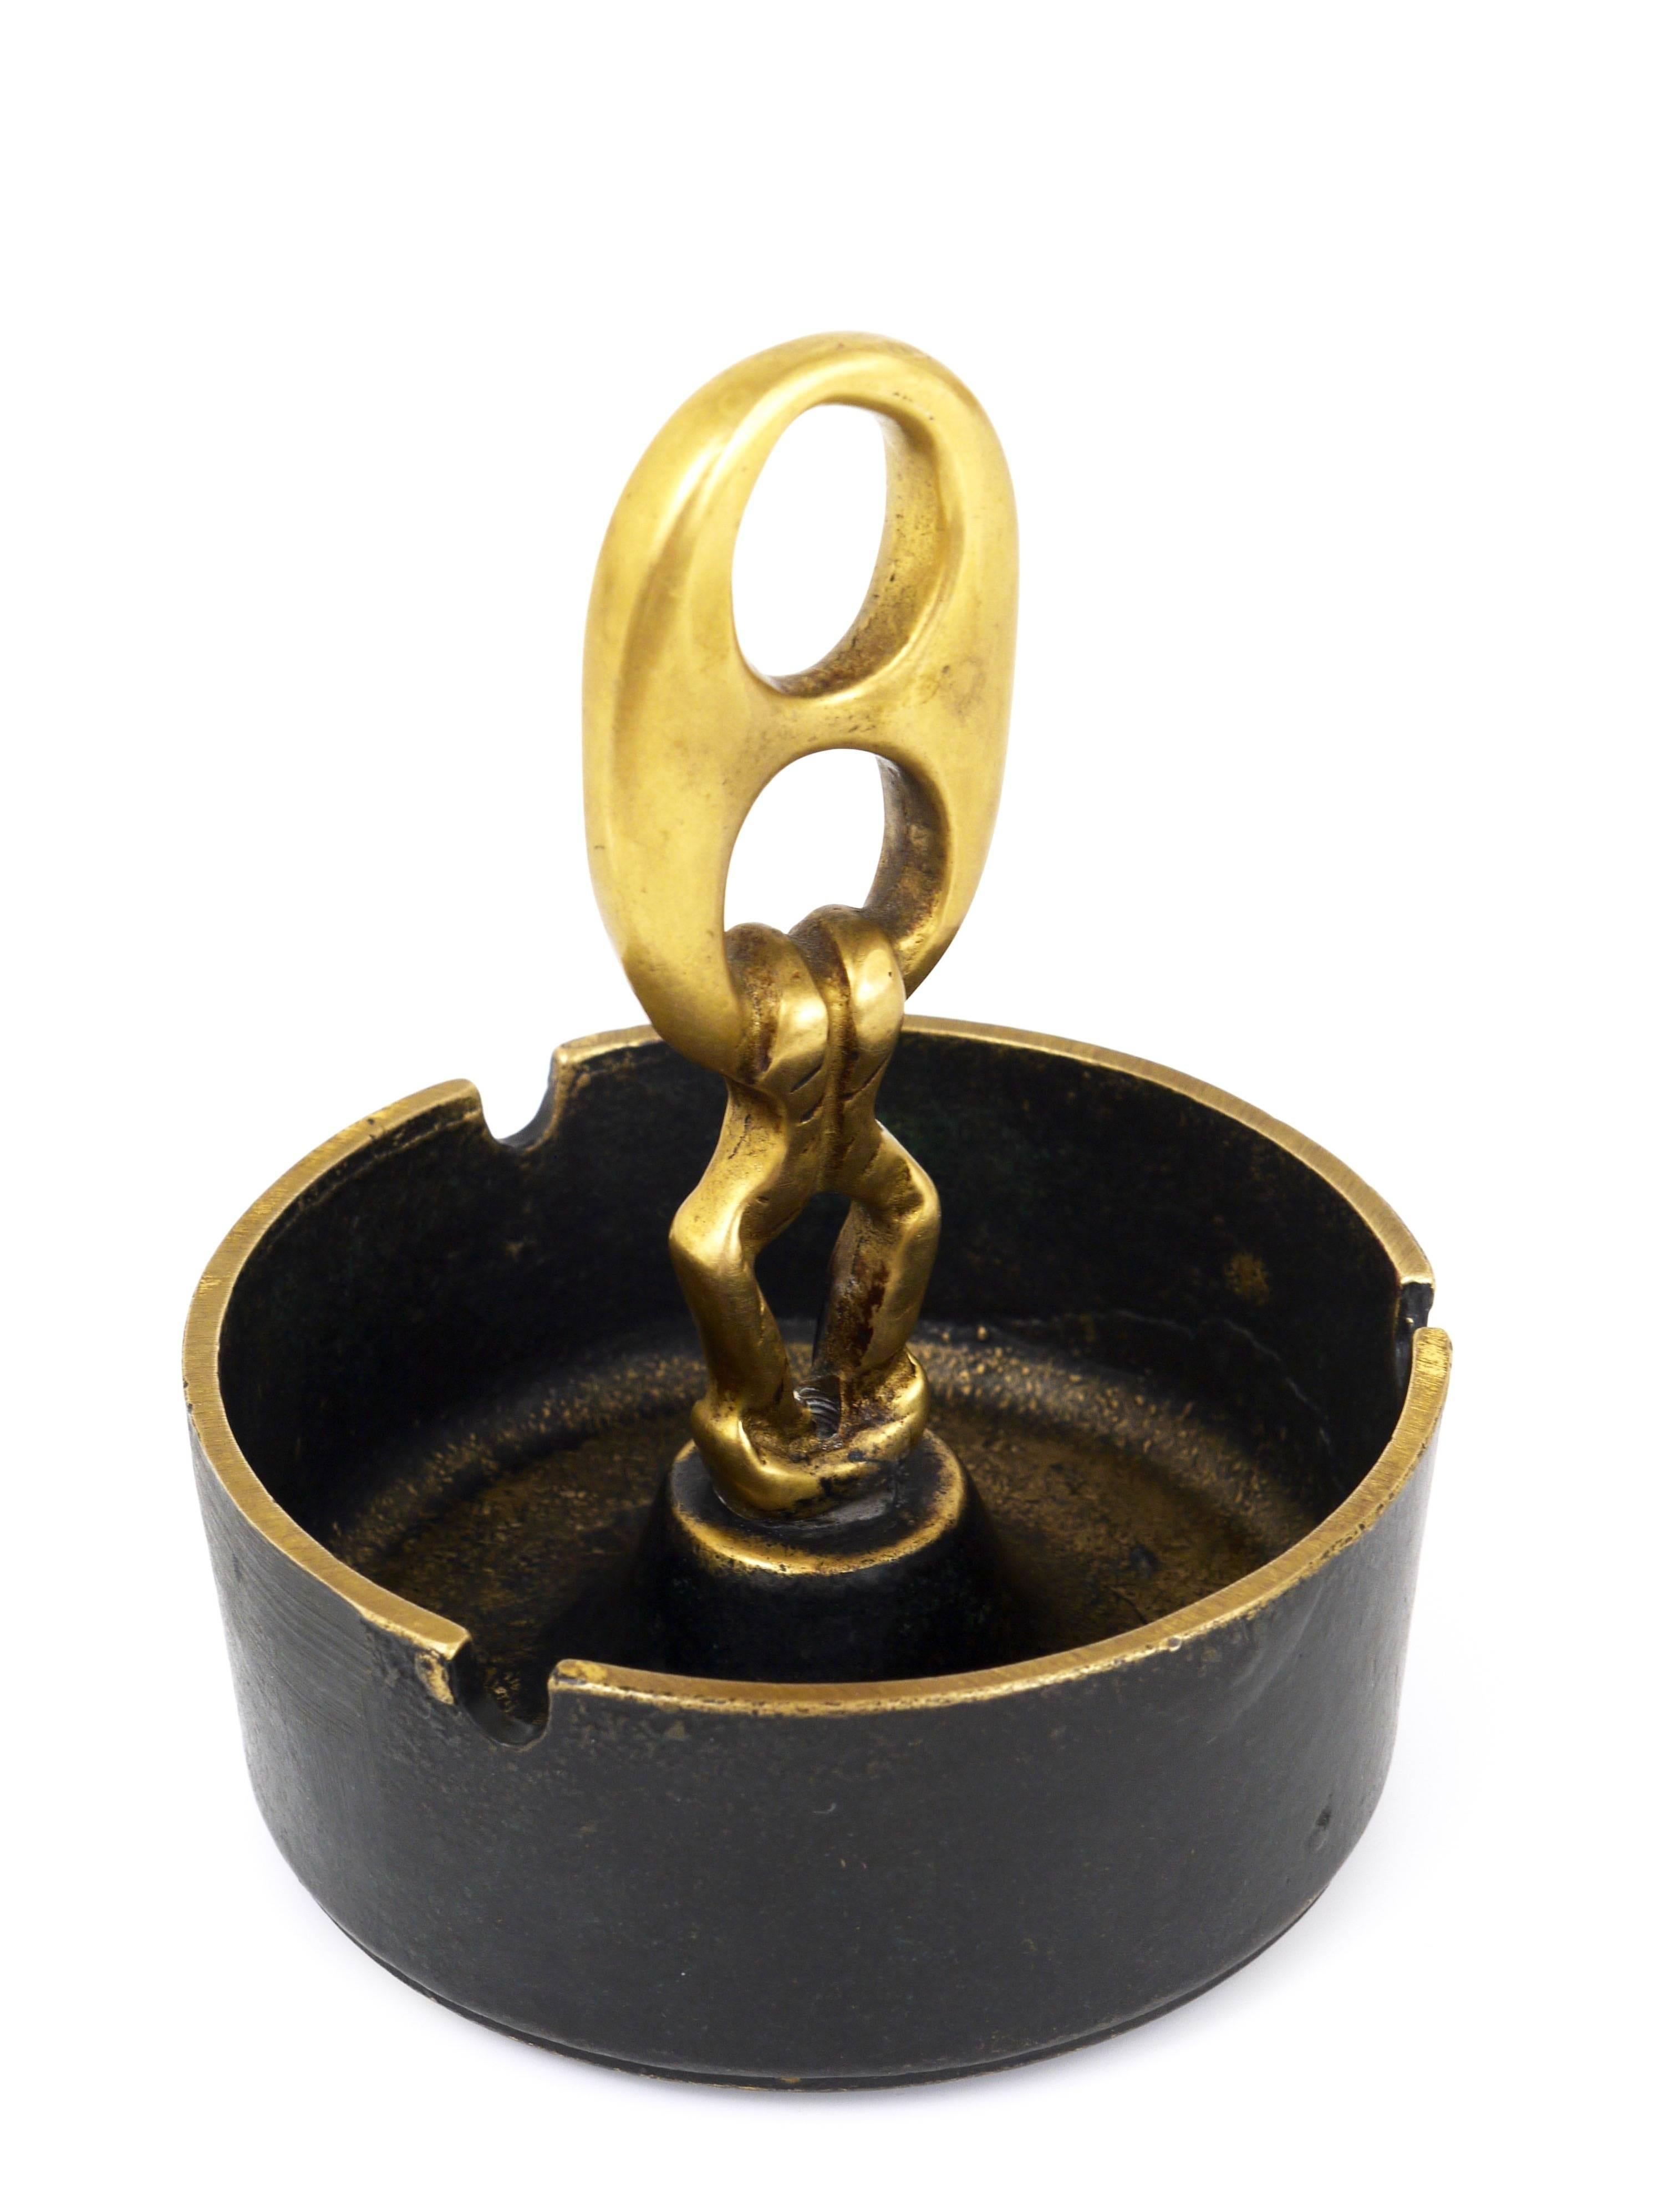 20th Century Mid-Century Modernist Brass Ashtray With Handle, Austria, 1950s For Sale